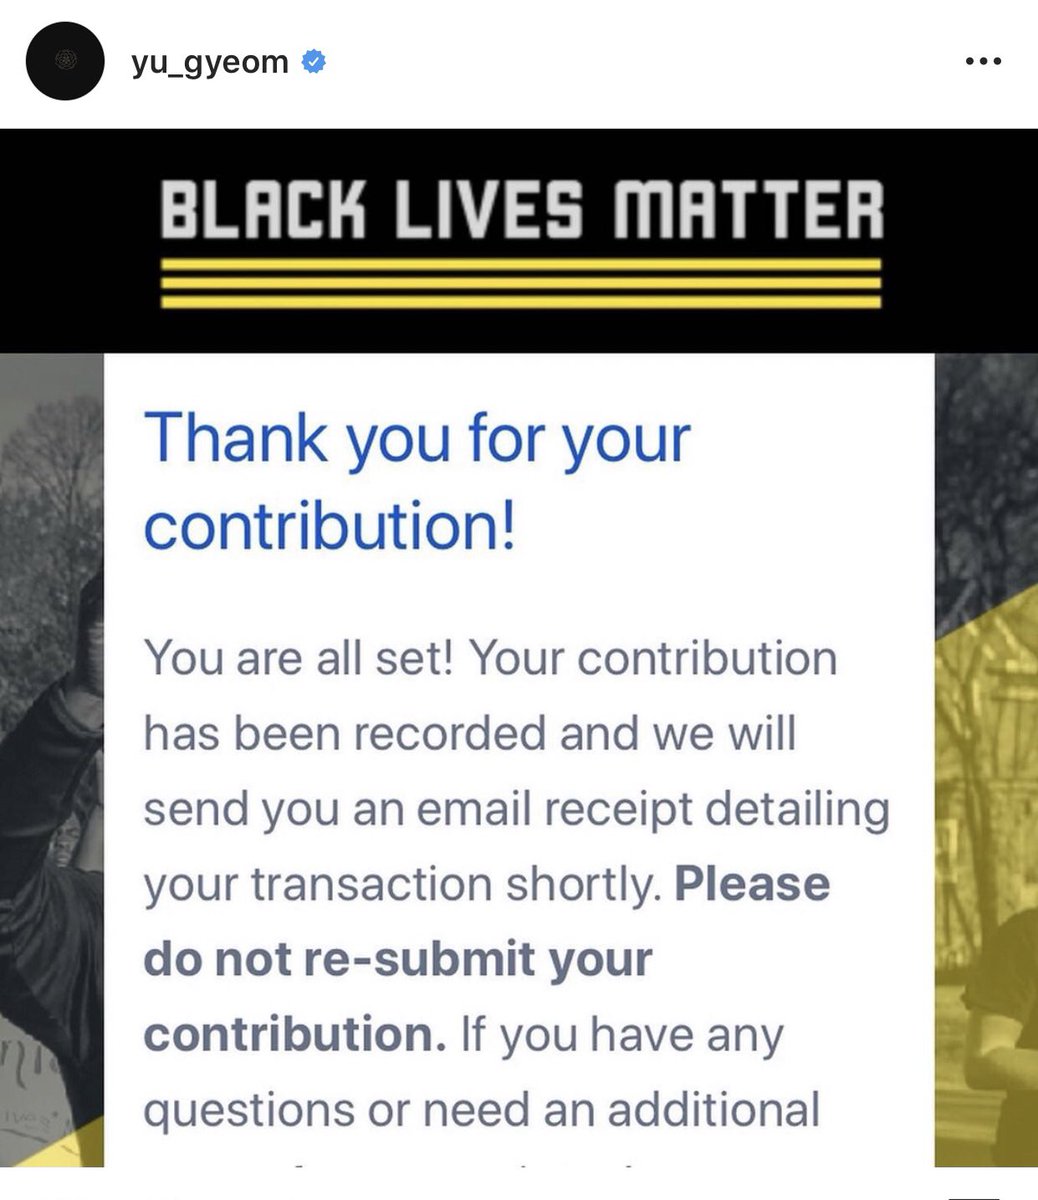 Because they supported blm